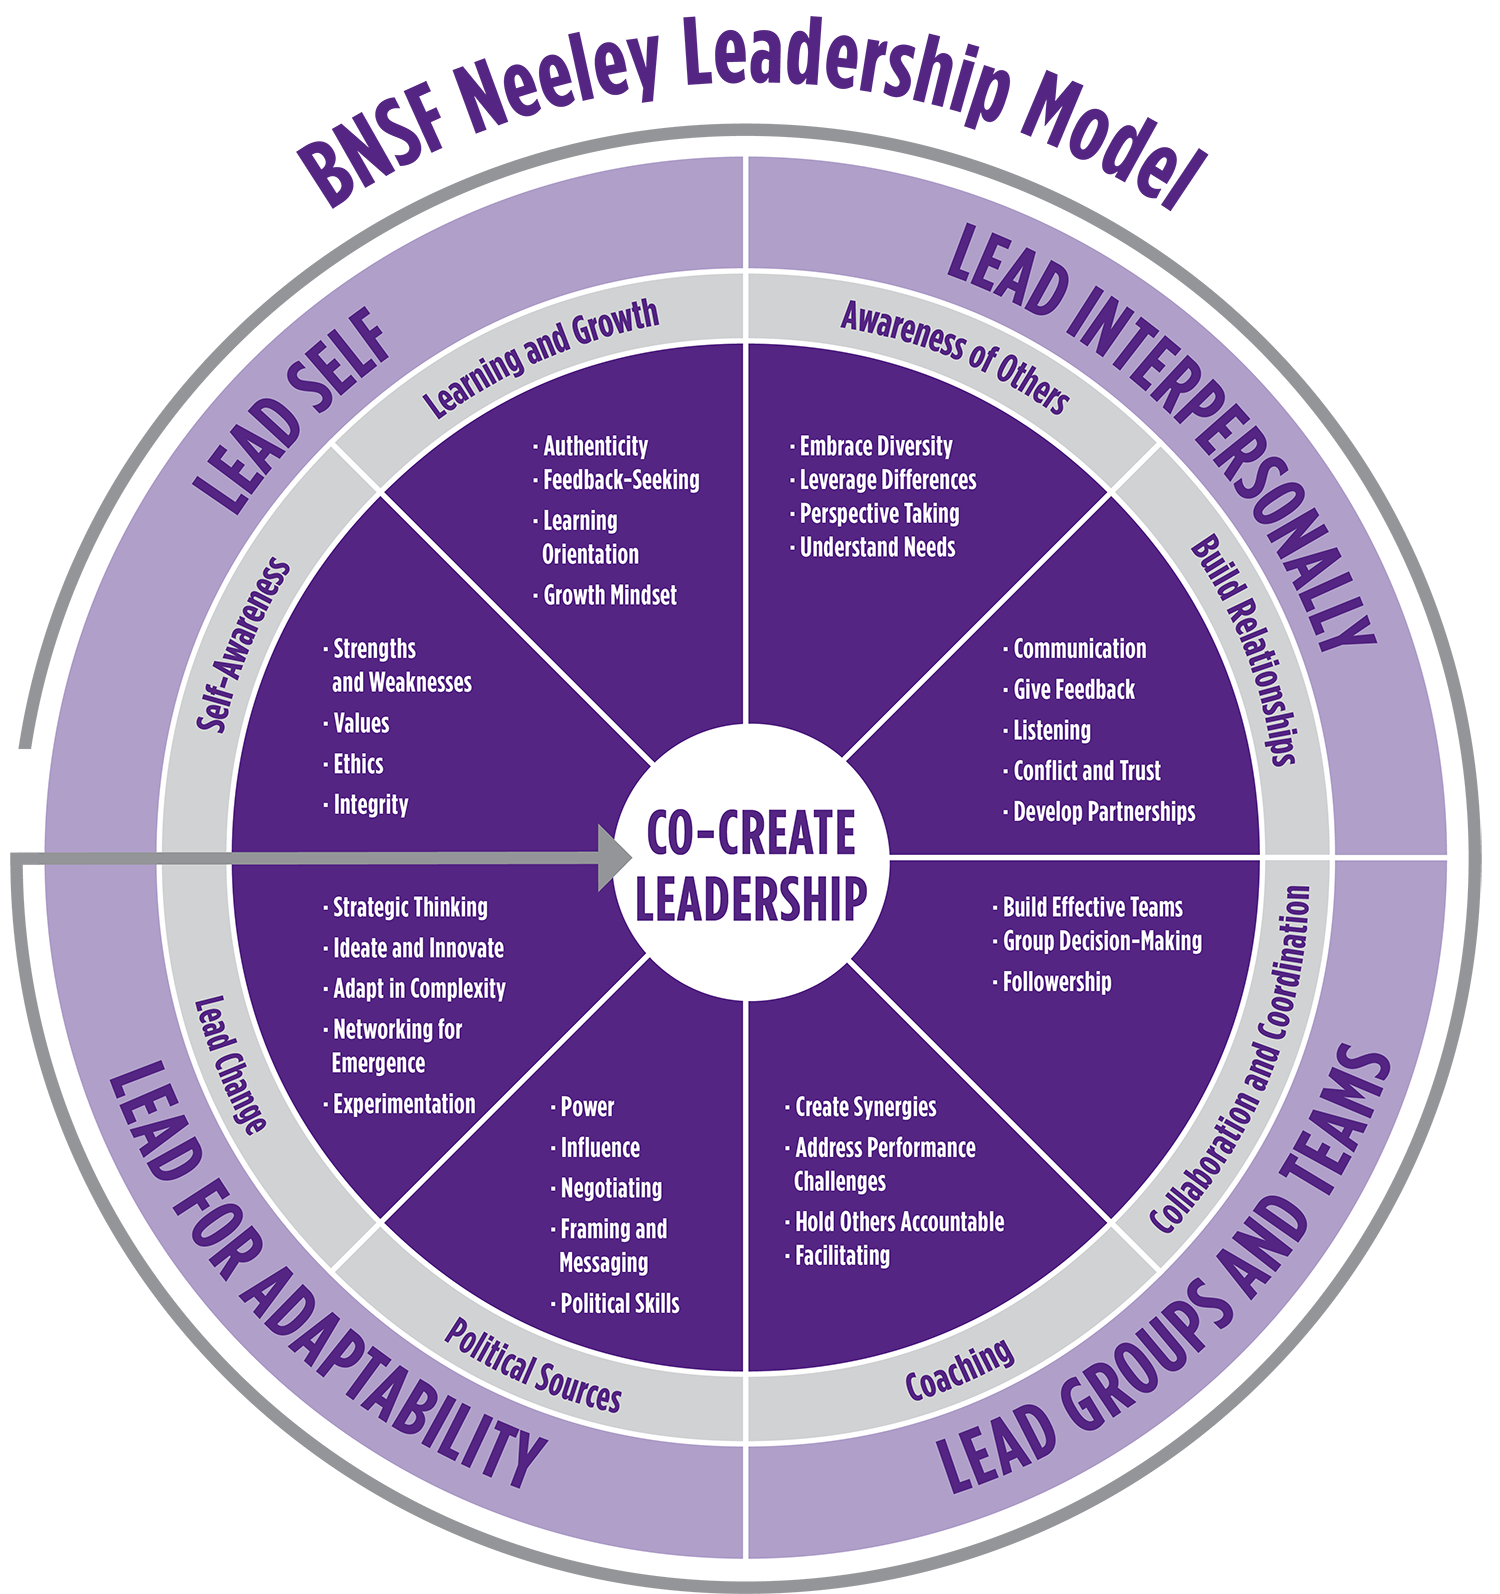 Click on the image for a screen-reader friendly version of the Neeley Leadership Model